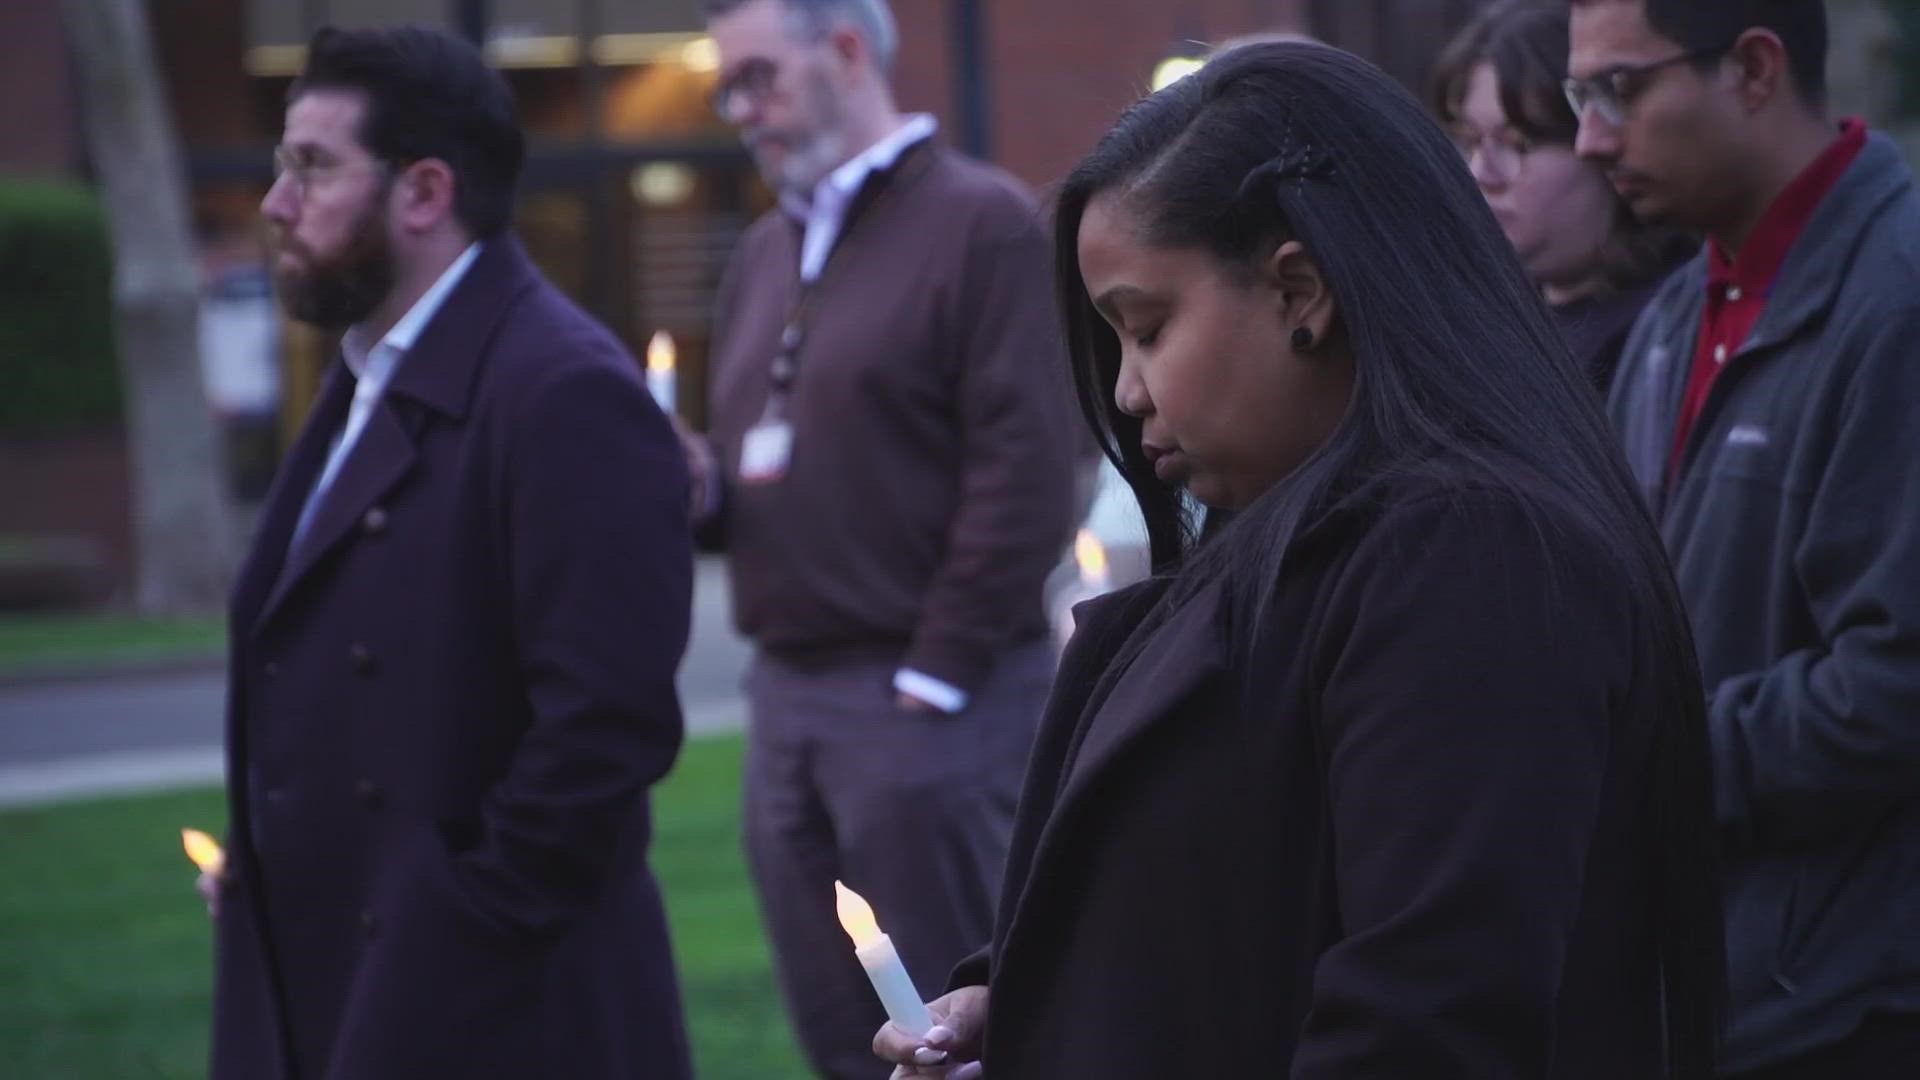 McGeorge School of Law in Sacramento held the event and allowed attendees to try and process and heal as they held candles, stood together in Nichols’ memory.